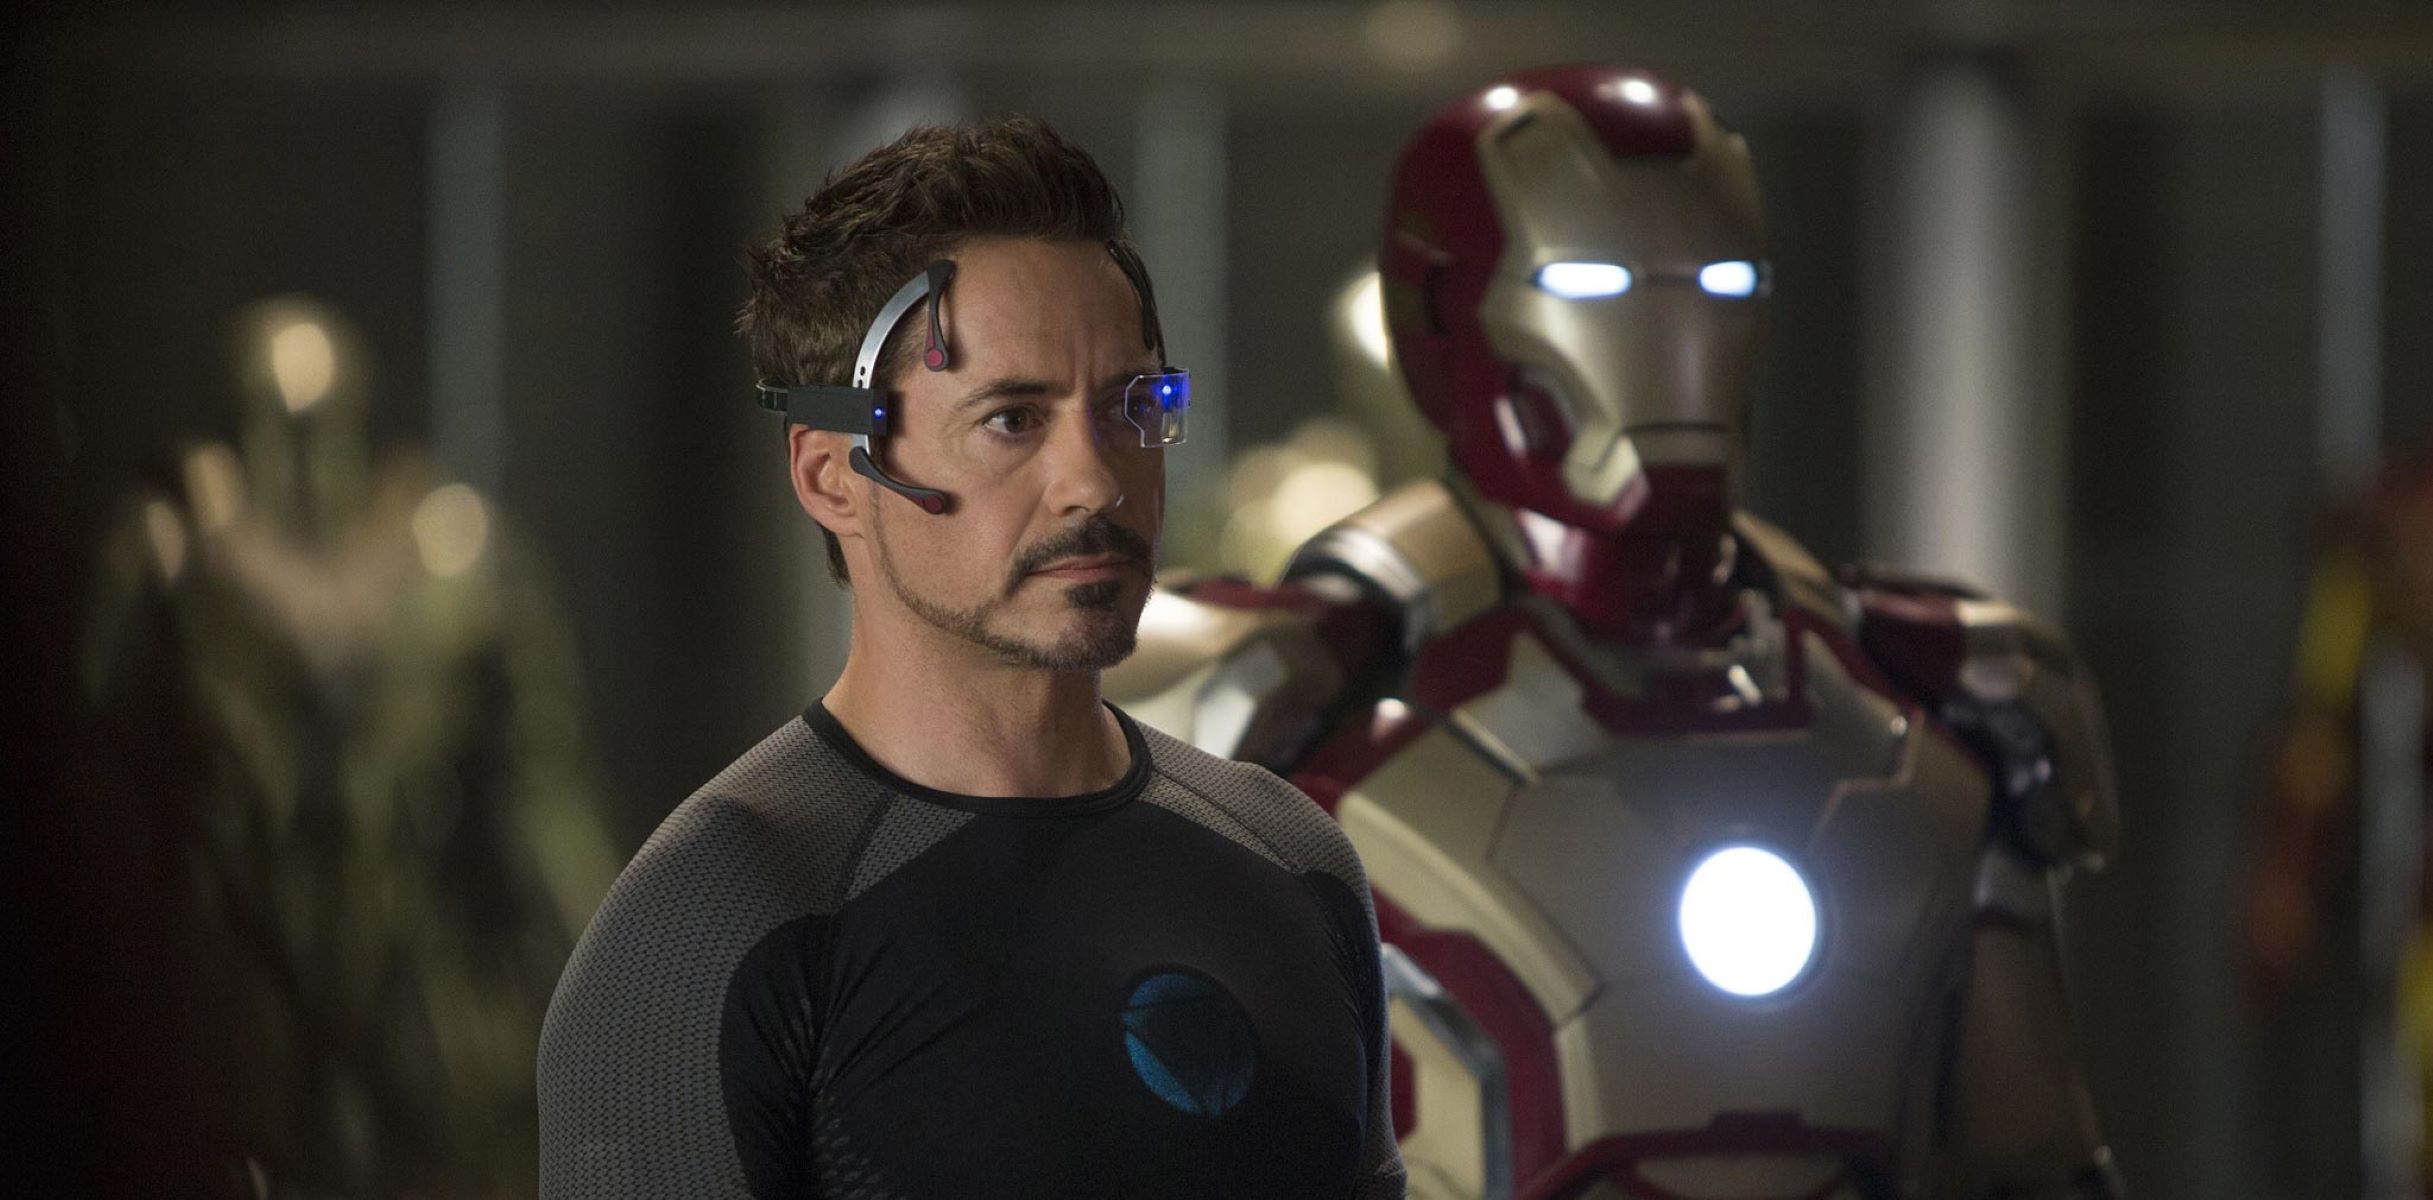 The Shocking Reason Fans Were Outraged By Iron Man's Controversial Desire In Avengers: Age Of Ultron